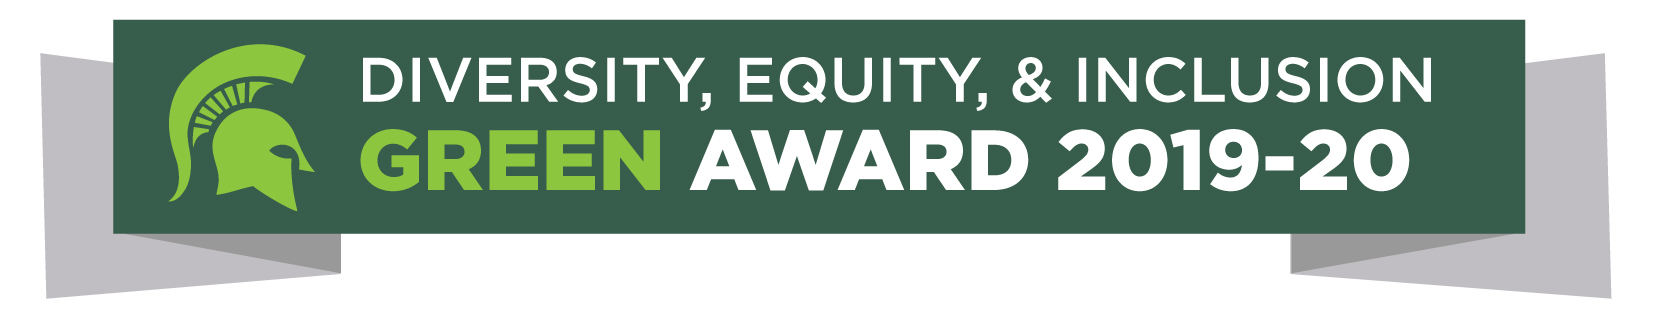 MSU CANR Diversity, Equity and Inclusion Green Award 2019-2020